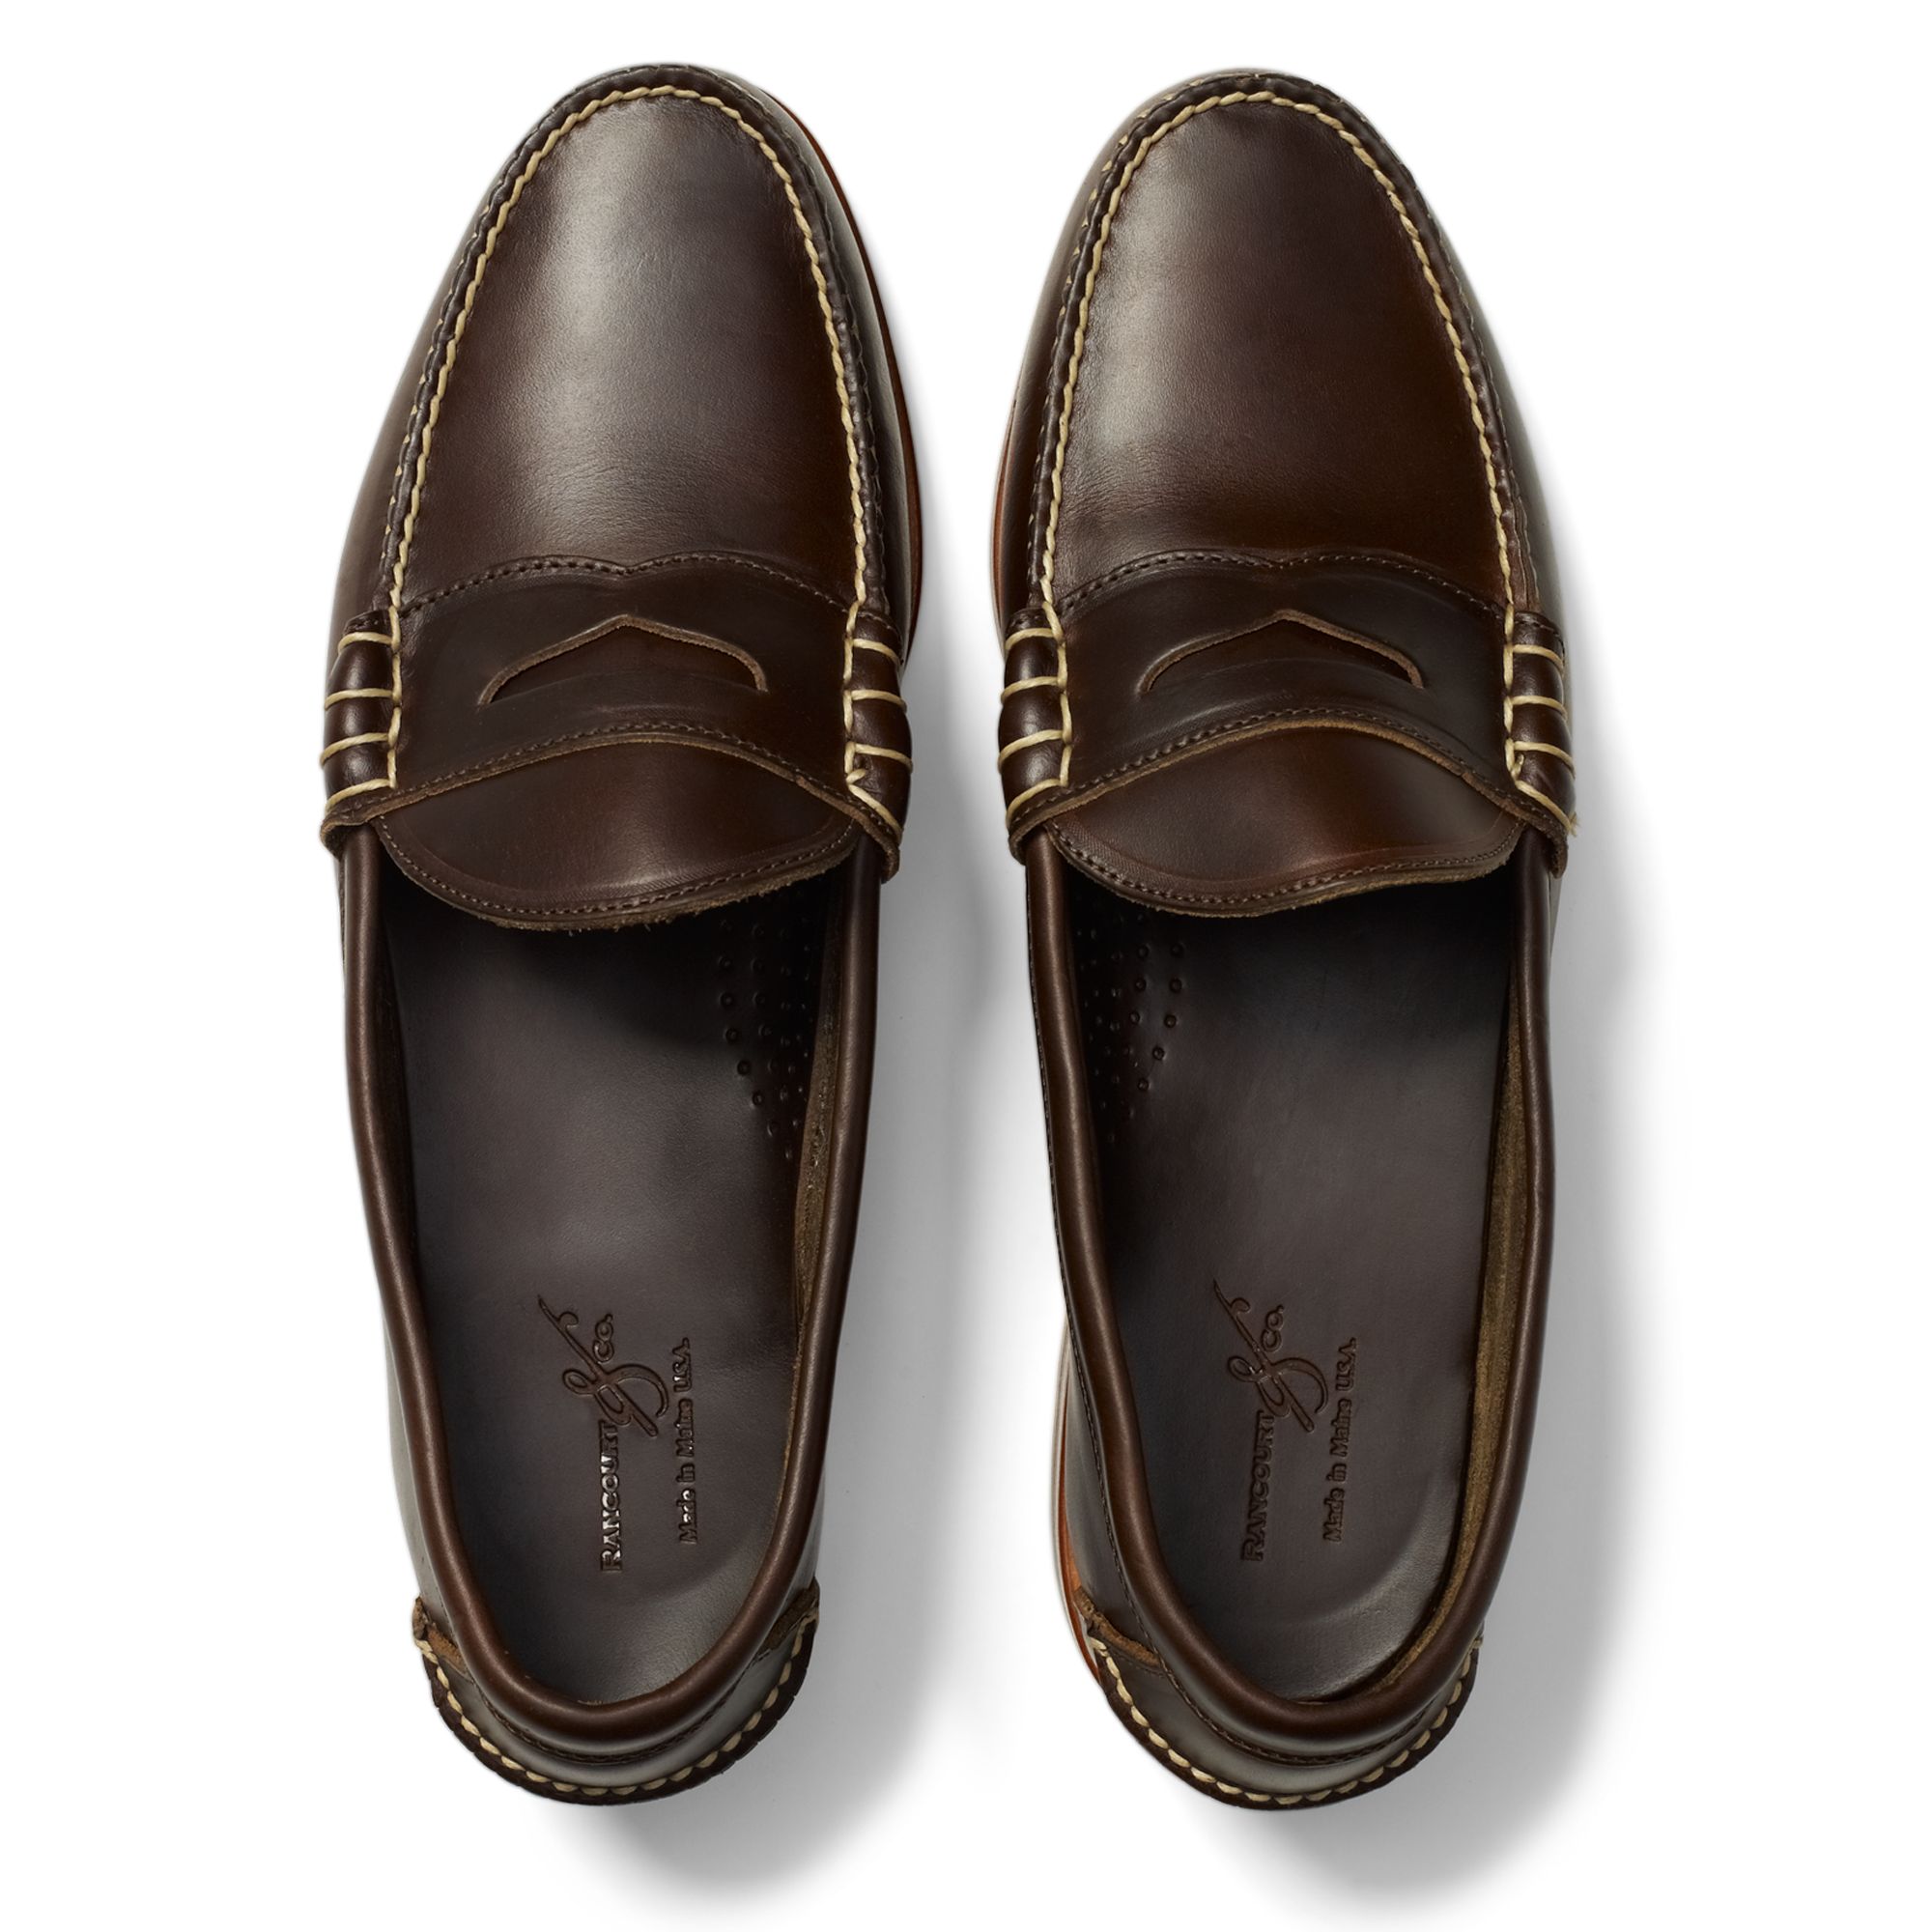 Lyst - Club Monaco Rancourt Beefroll Penny Loafer in Brown for Men